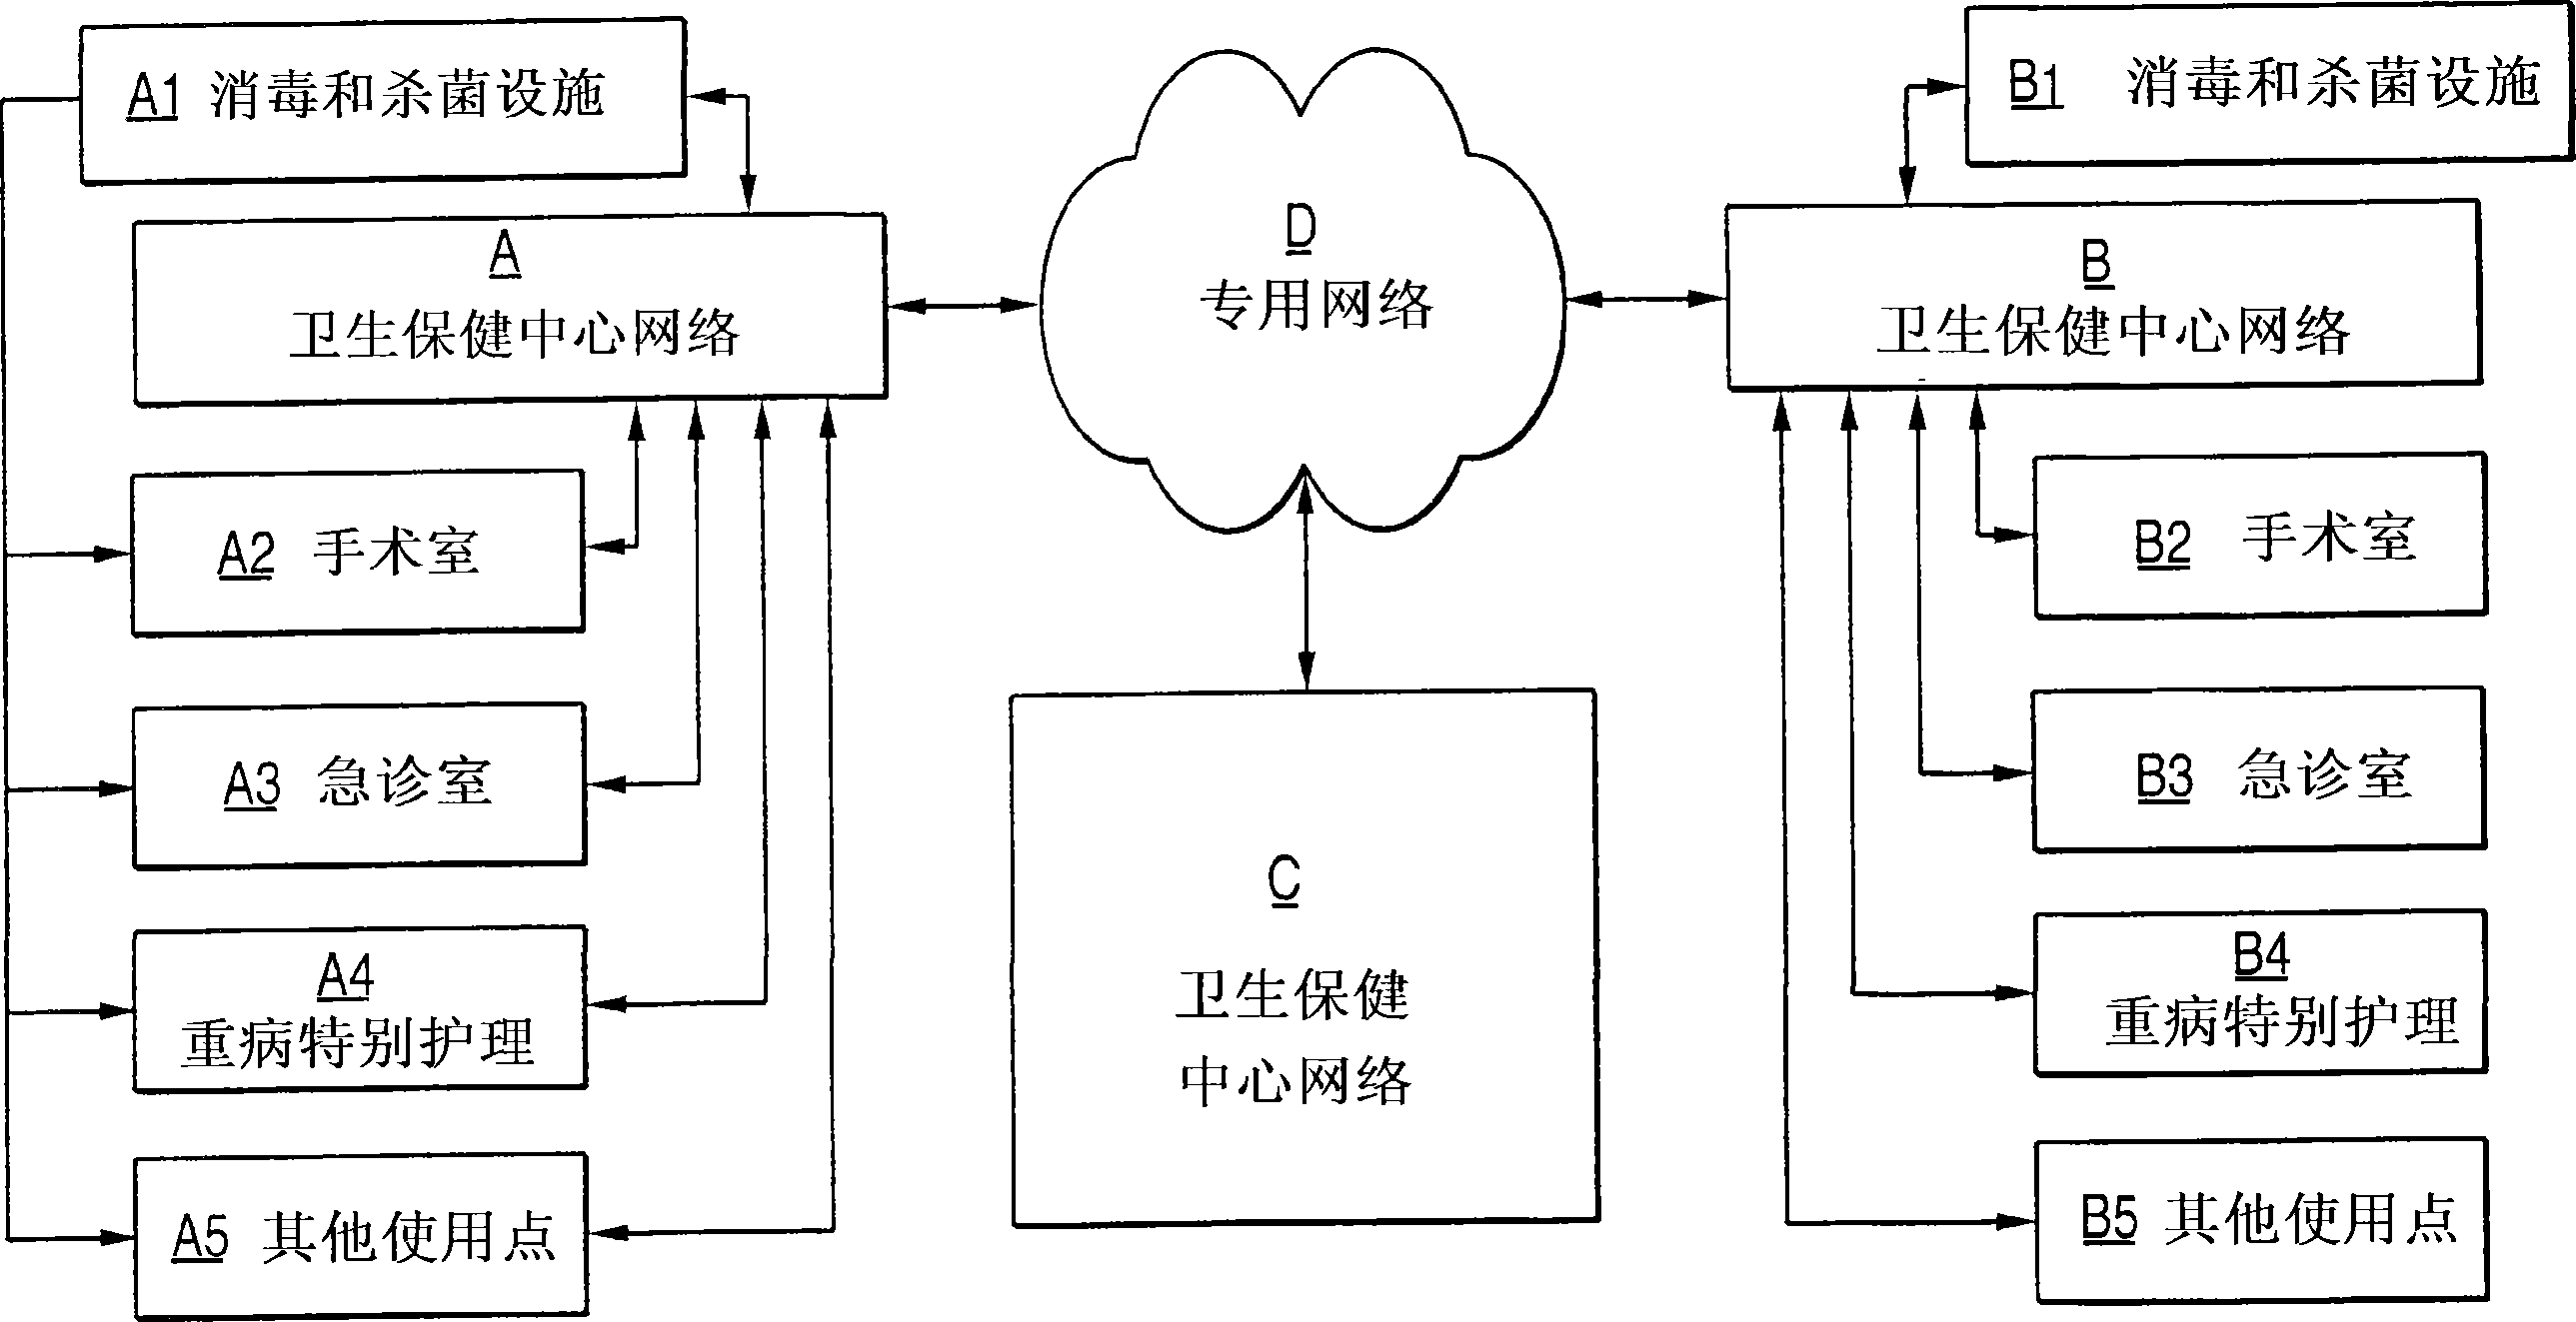 System for management of processed instruments